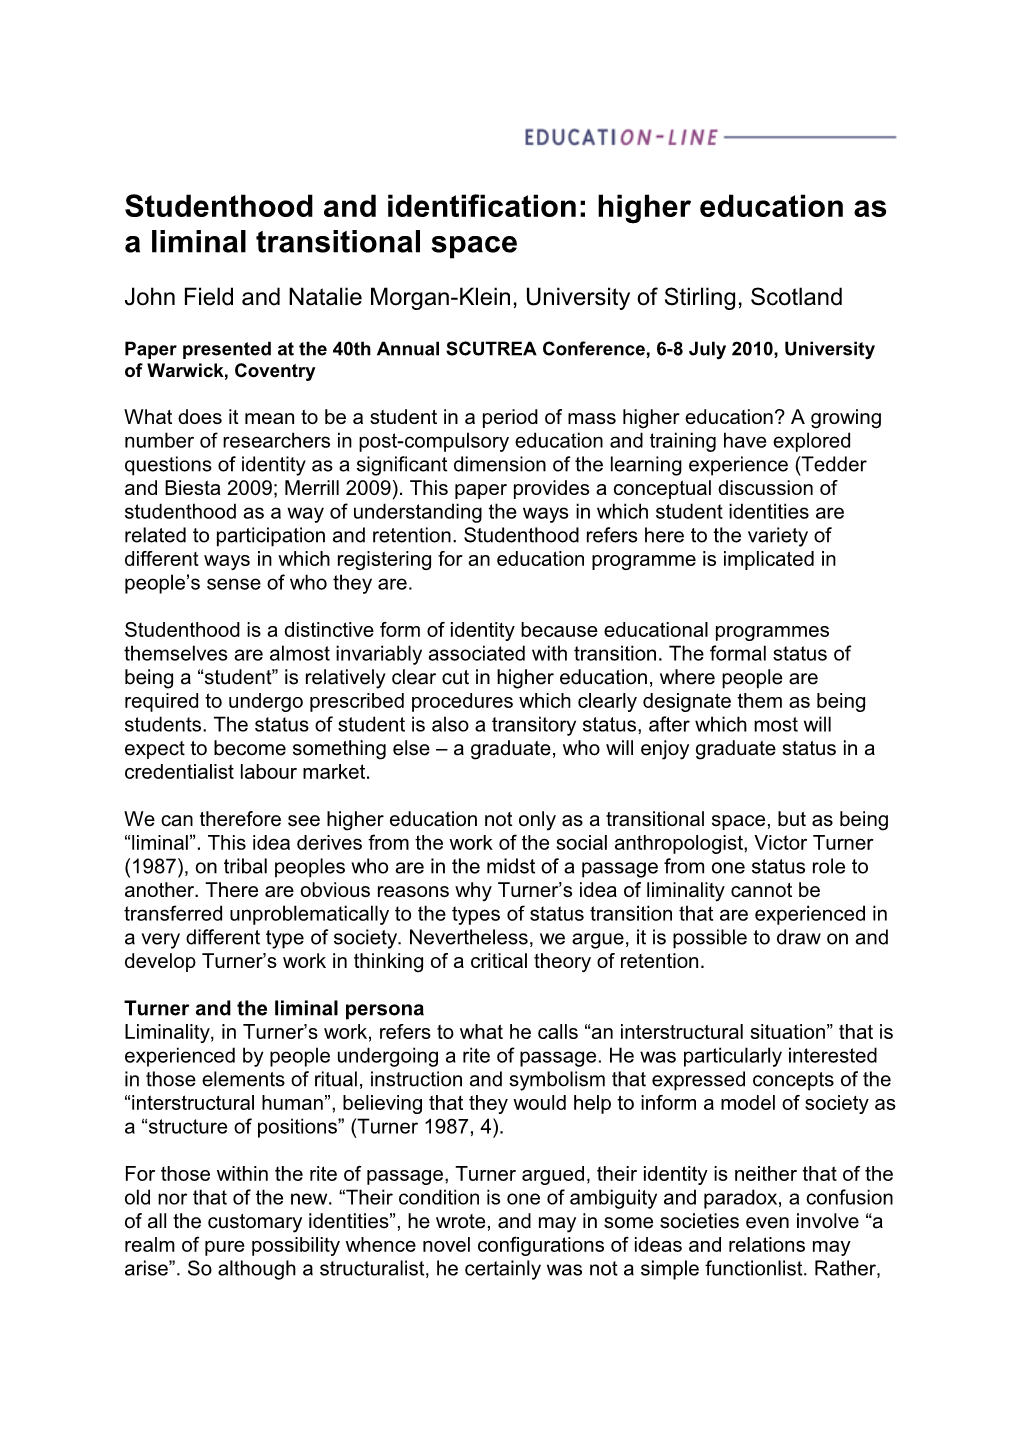 Studenthood and Identification: Higher Education As a Liminal Transitional Space